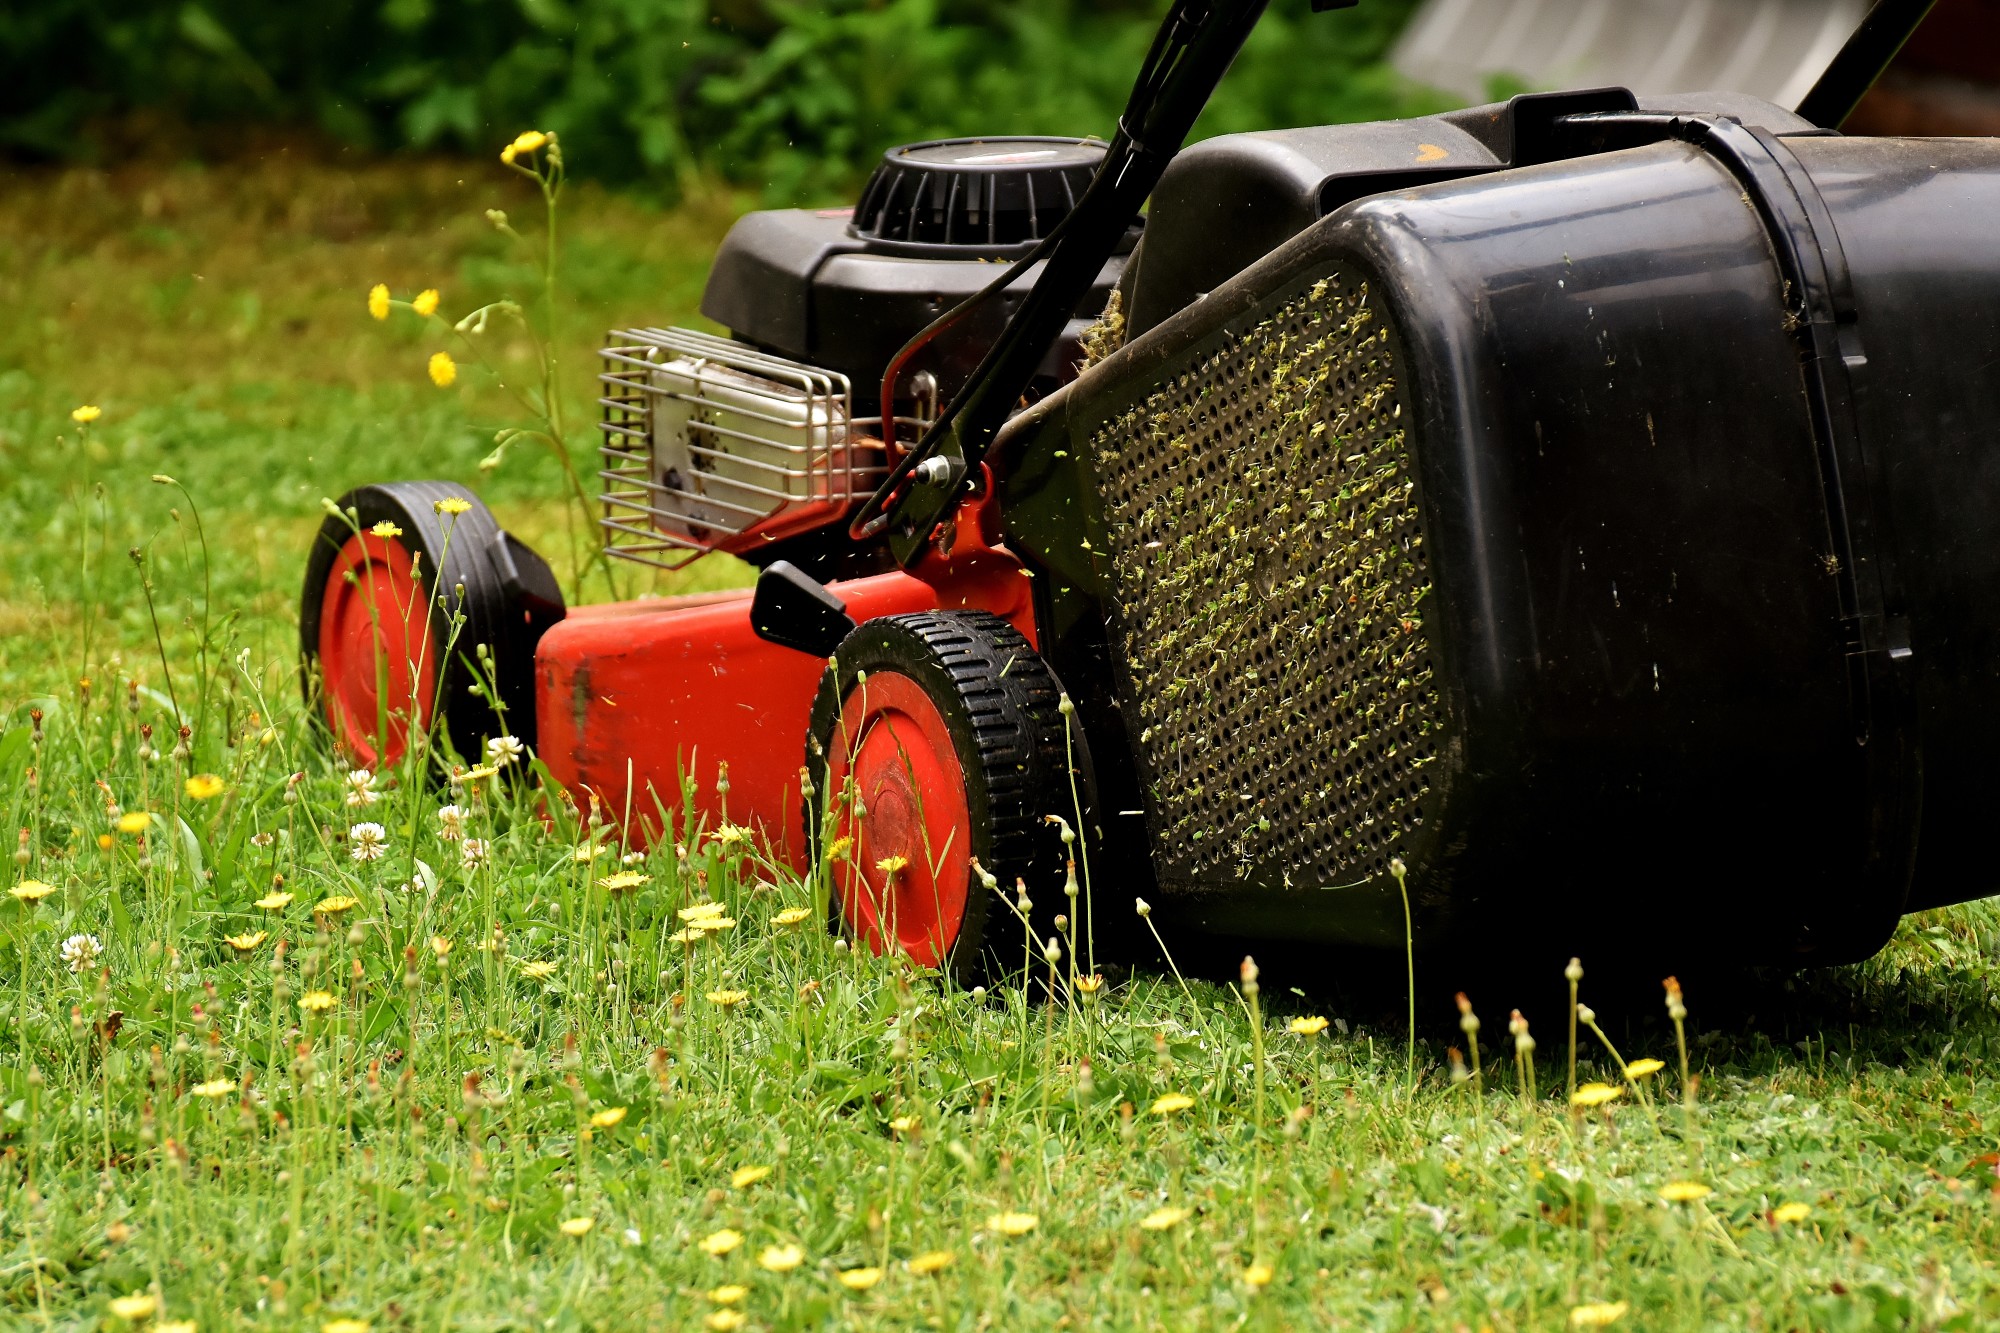 Are you tired of a lackluster lawn? Follow these best practices for lawn mowing to achieve a healthy, green lawn that will be the envy of the neighborhood.